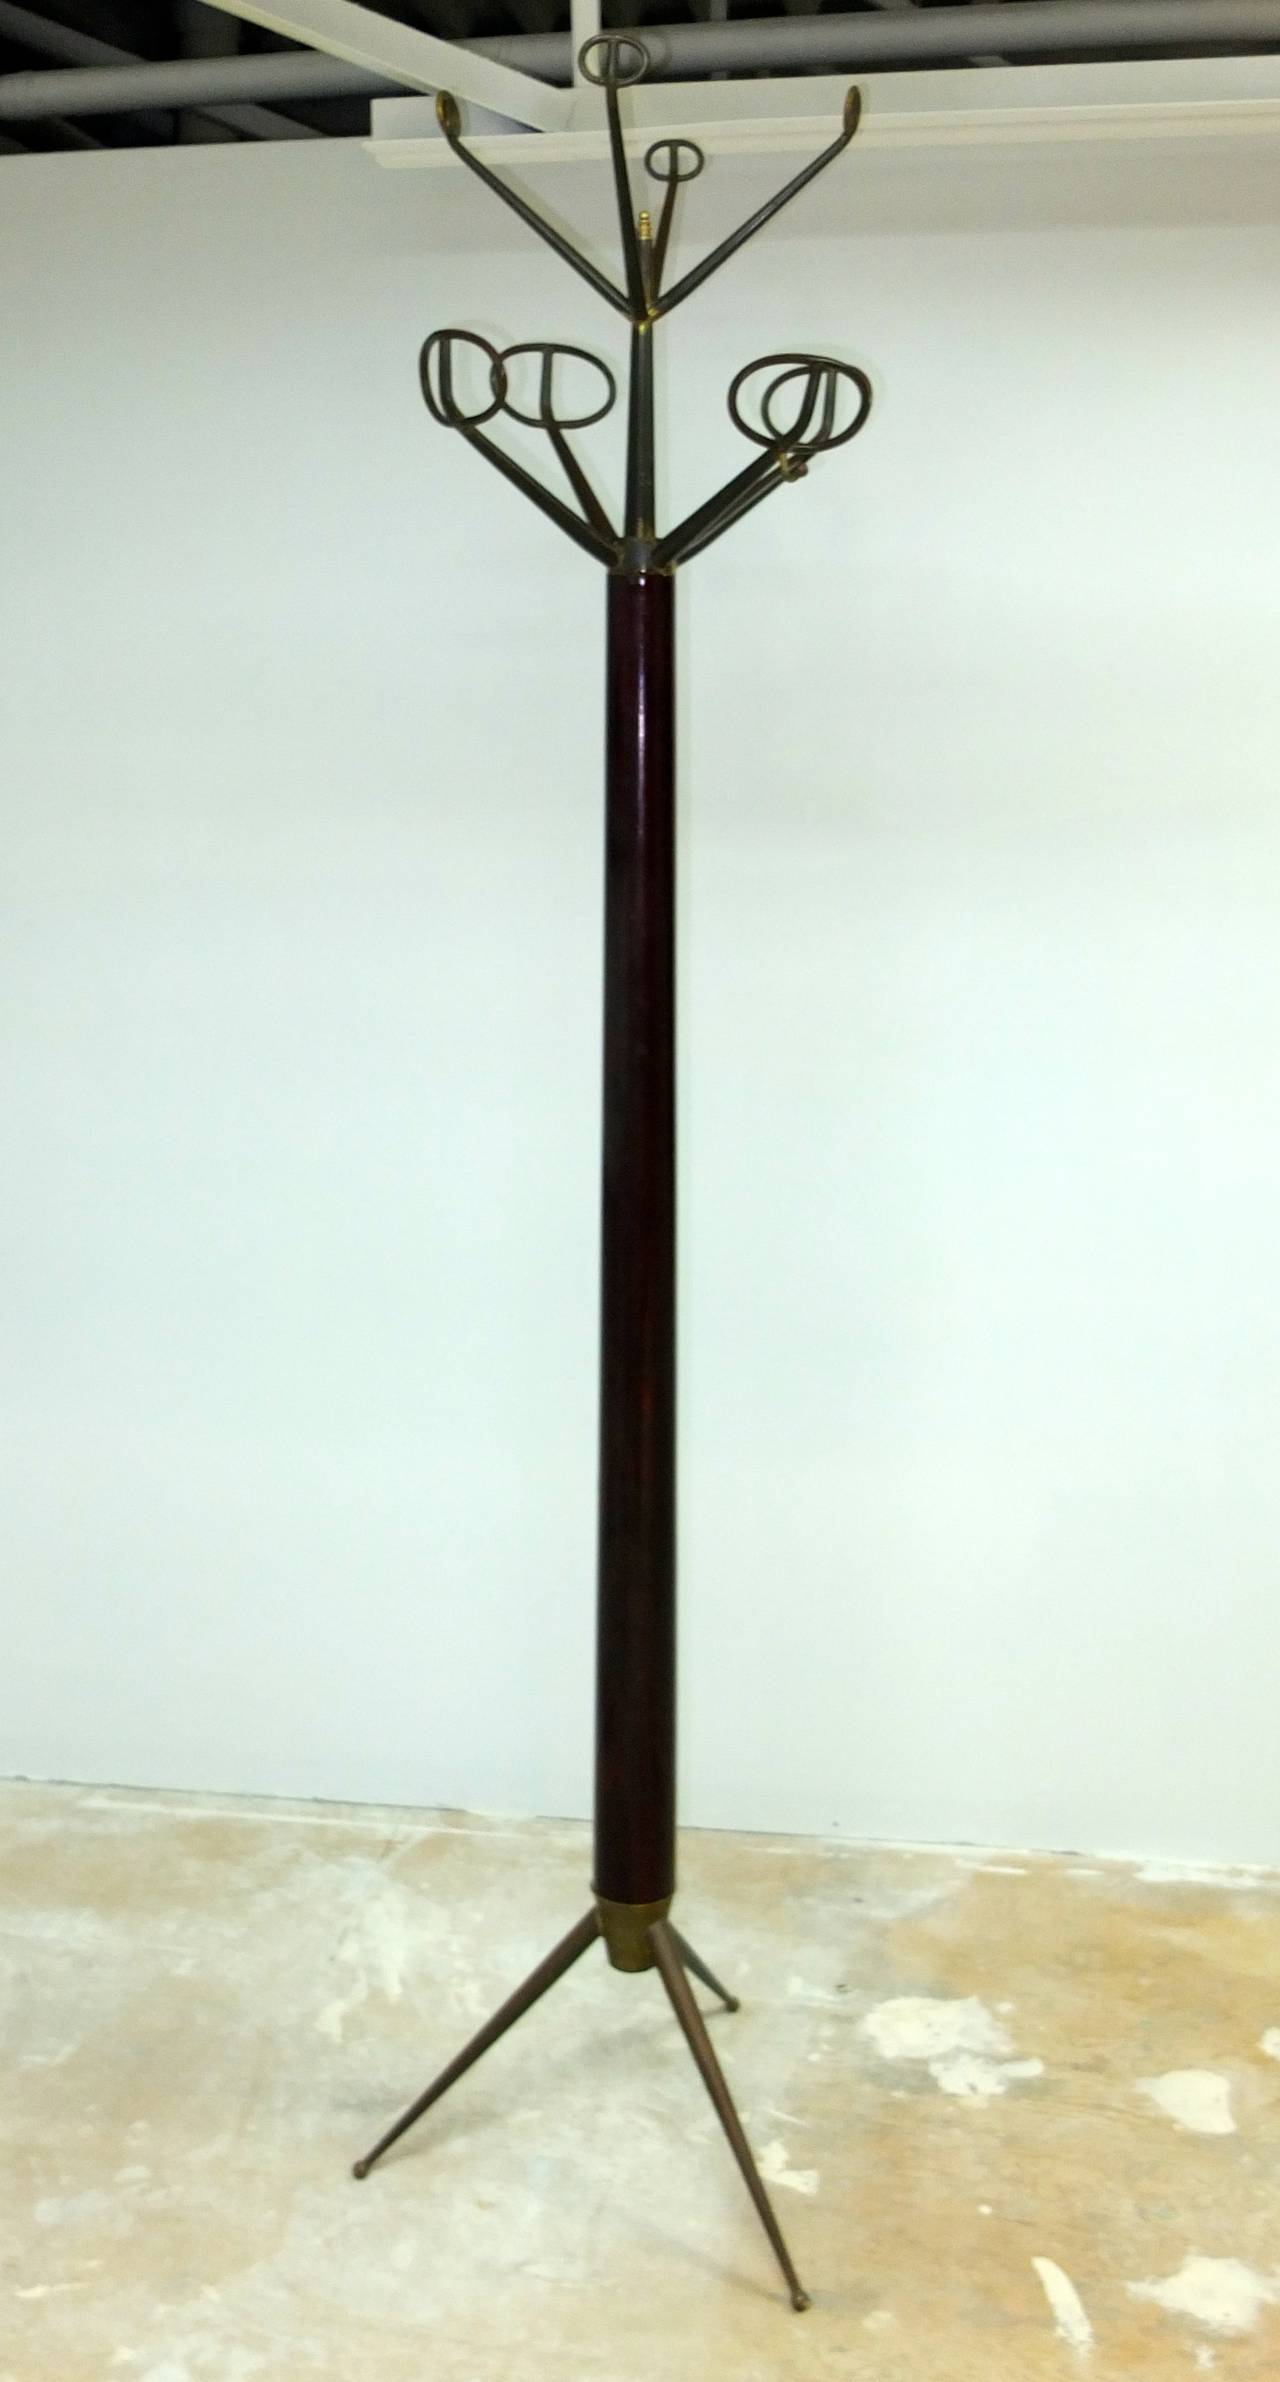 Stunning 1950s Italian coat stand with a single mahogany tapered shaft set in a solid brass tapered tripod base and topped with a two-tier crown of solid brass tapered hooks with modernist loop ends. We have chosen to leave the heavy bronze colored